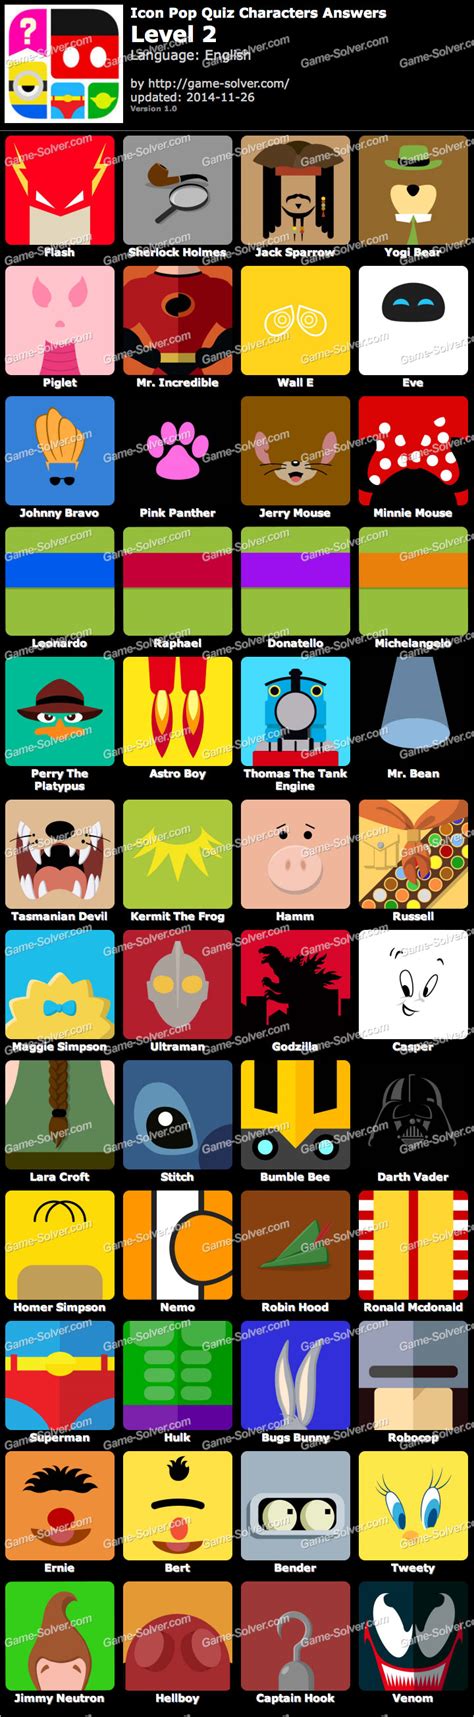 icon pop quiz characters level 2 game solver